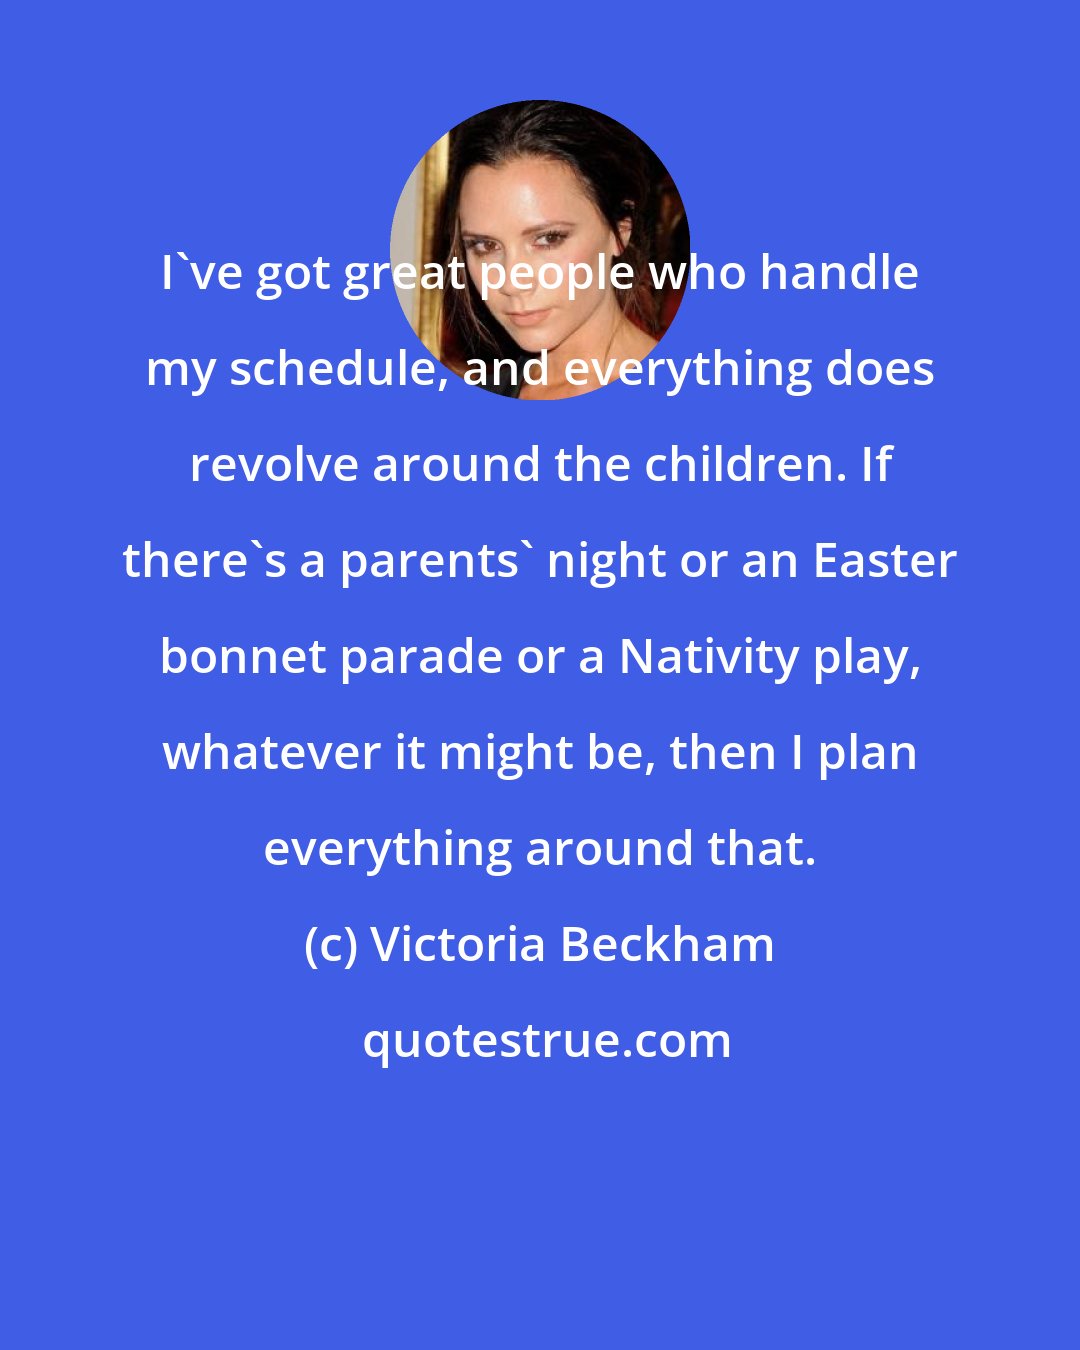 Victoria Beckham: I've got great people who handle my schedule, and everything does revolve around the children. If there's a parents' night or an Easter bonnet parade or a Nativity play, whatever it might be, then I plan everything around that.